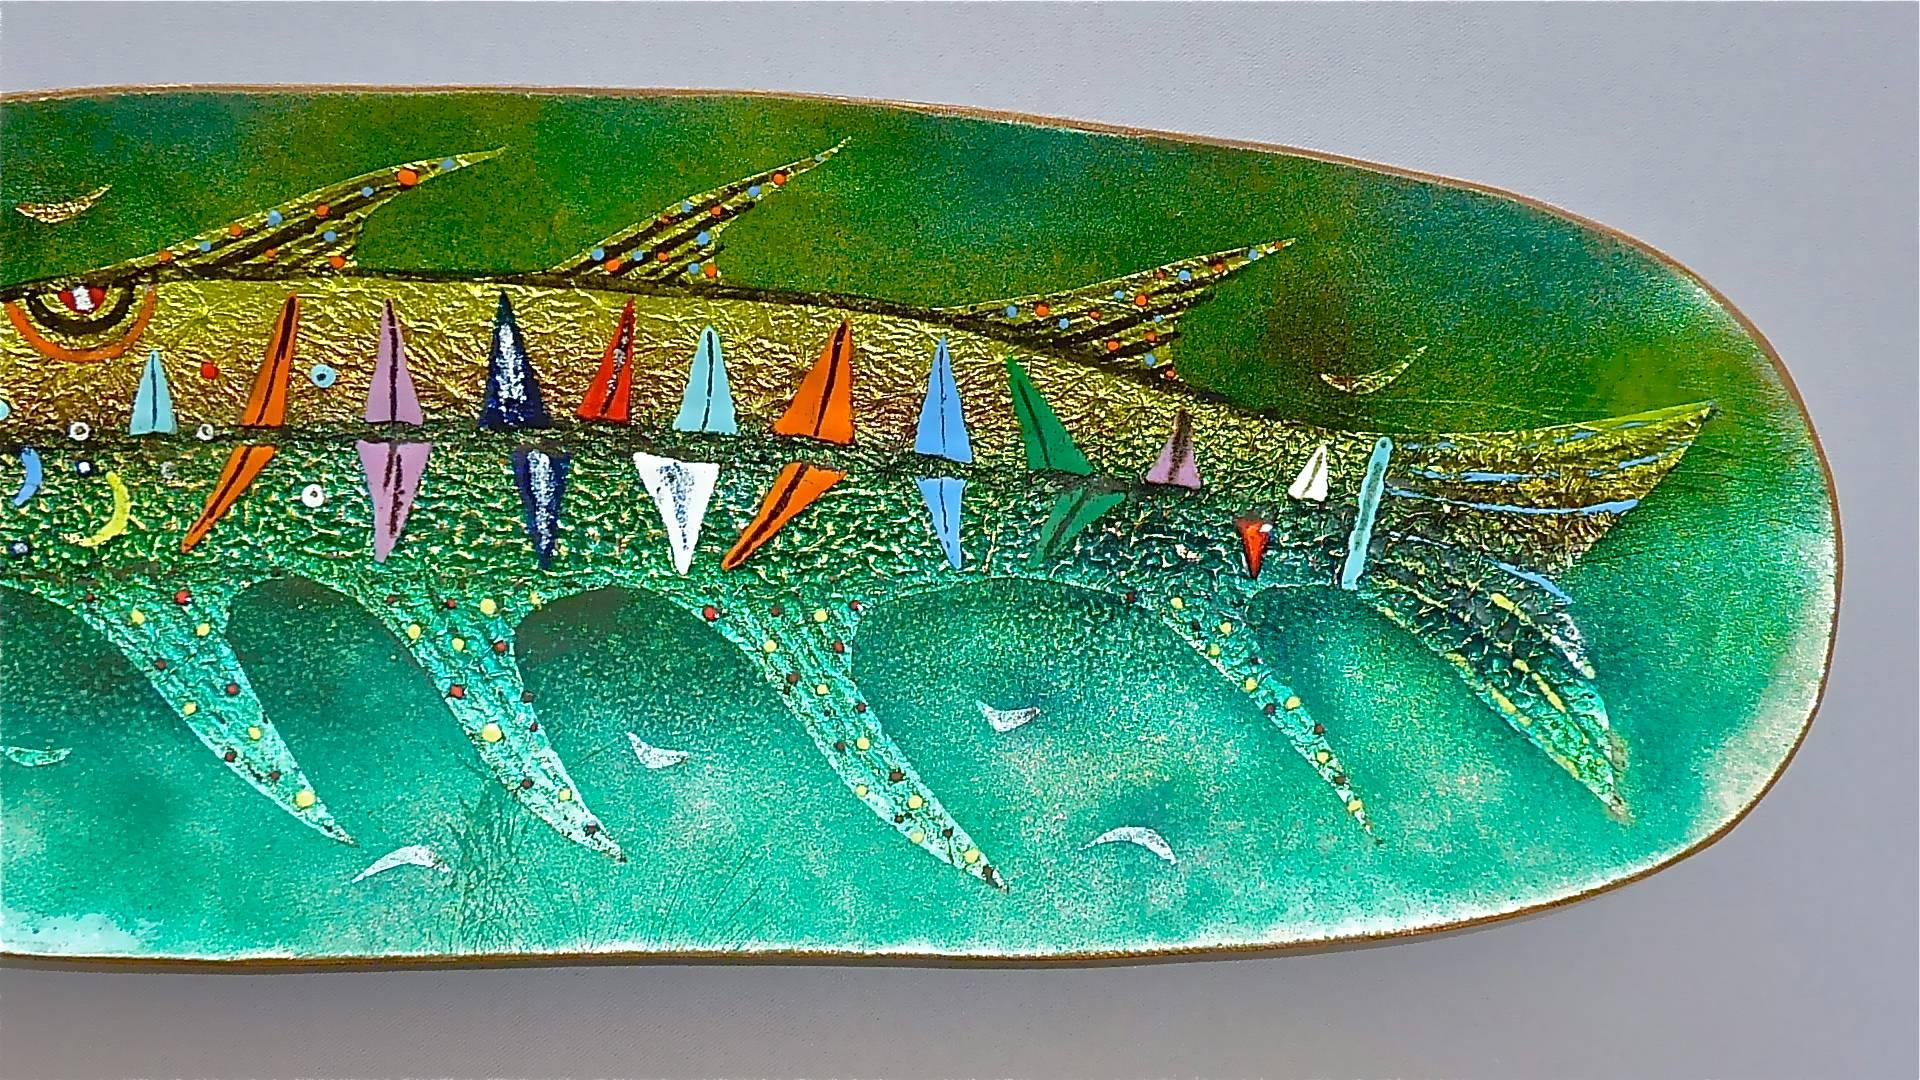 Mid-Century Modern Large Green Colorful Enamel on Copper Fish Bowl De Poli or circle, Italy, 1950s